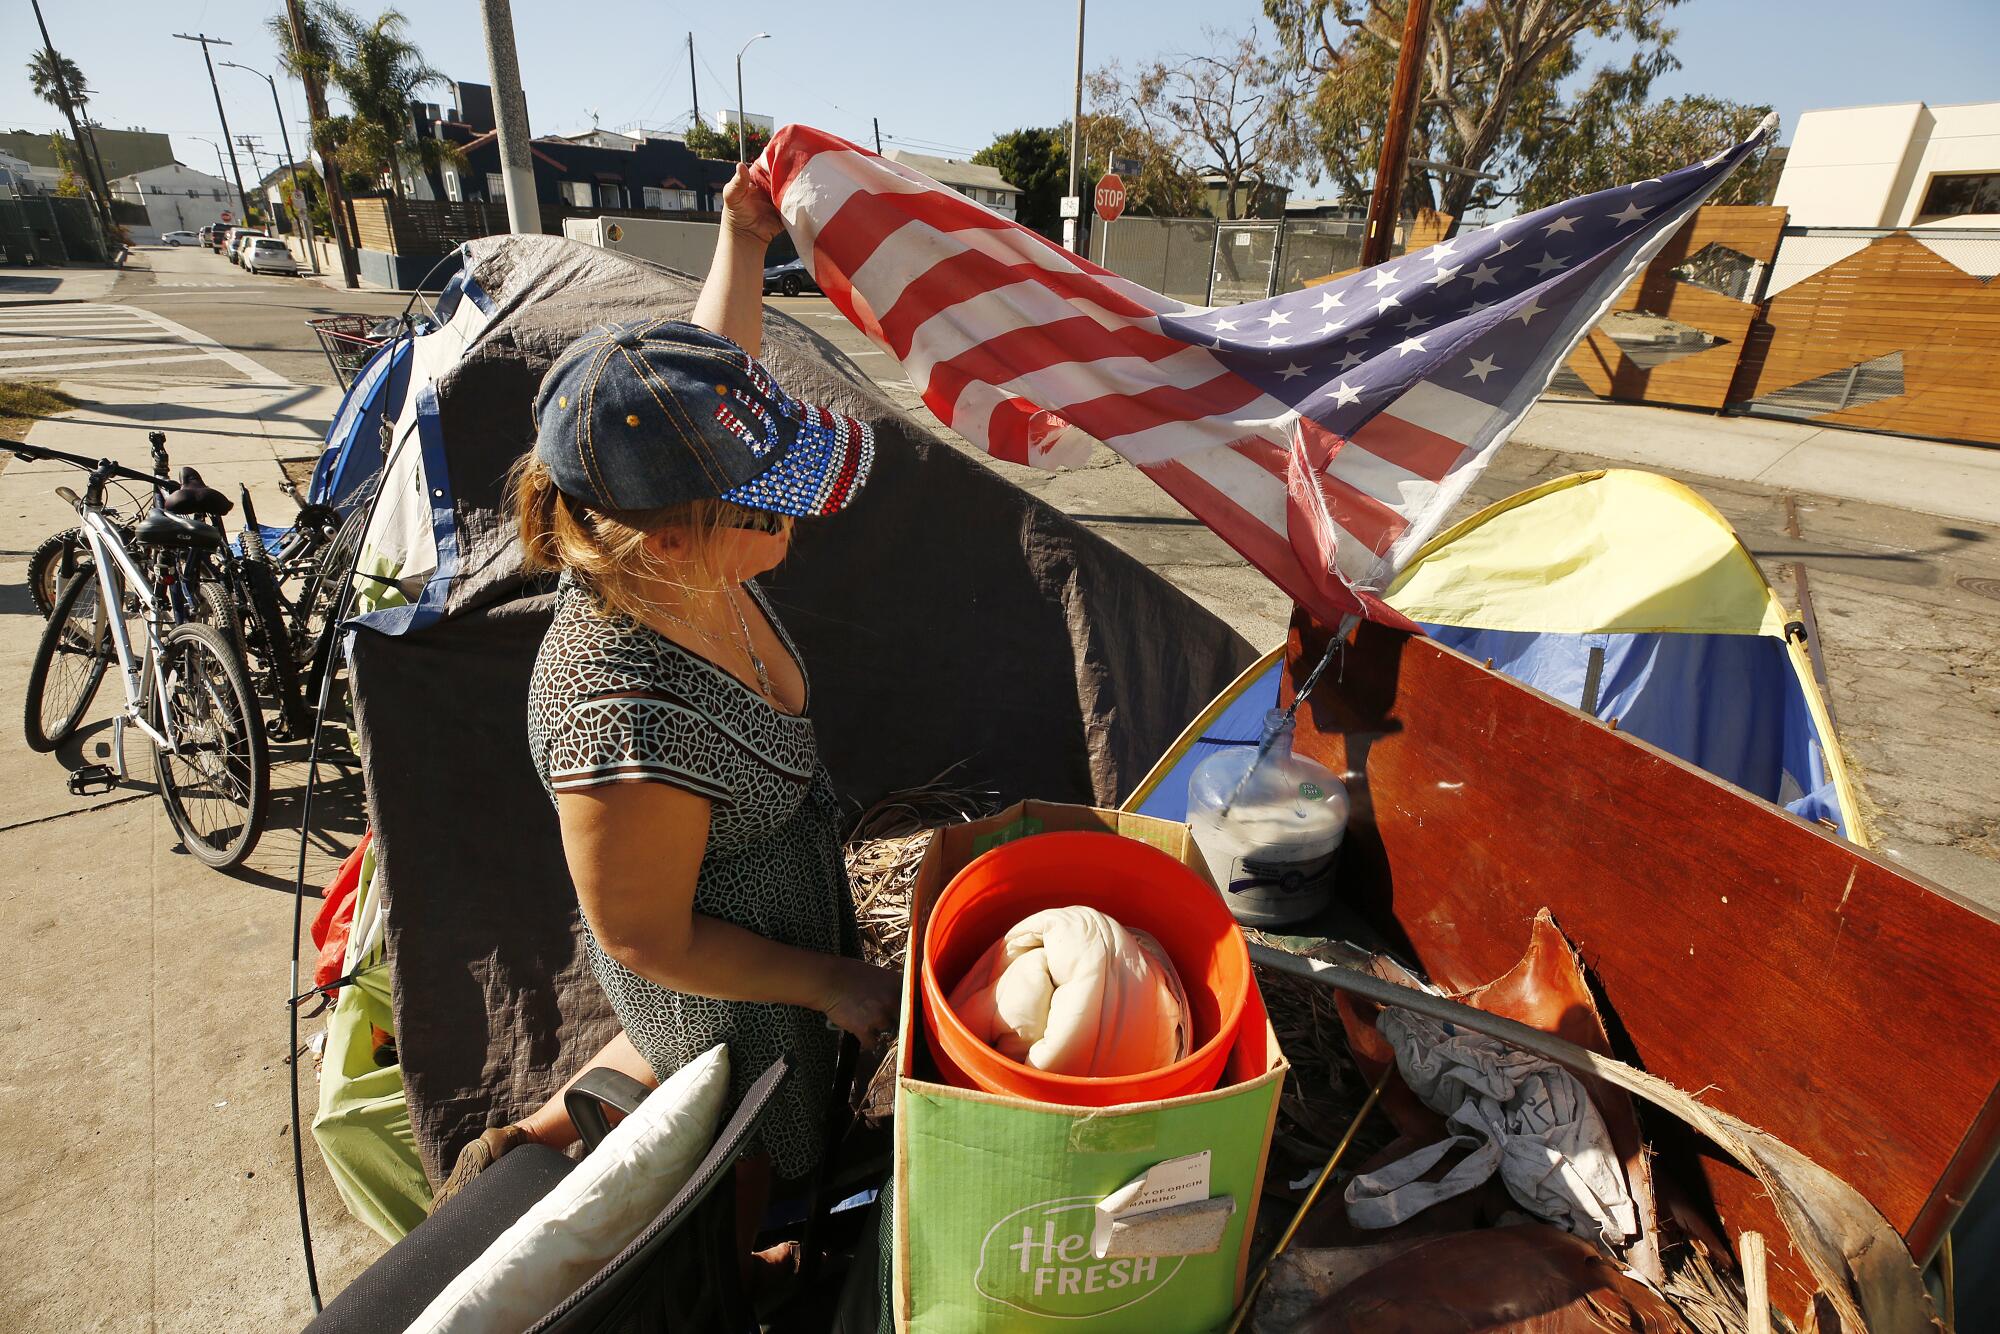 Elisabeth Axiotis is camped  in a Venice parking lot across the street from A Bridge Home shelter